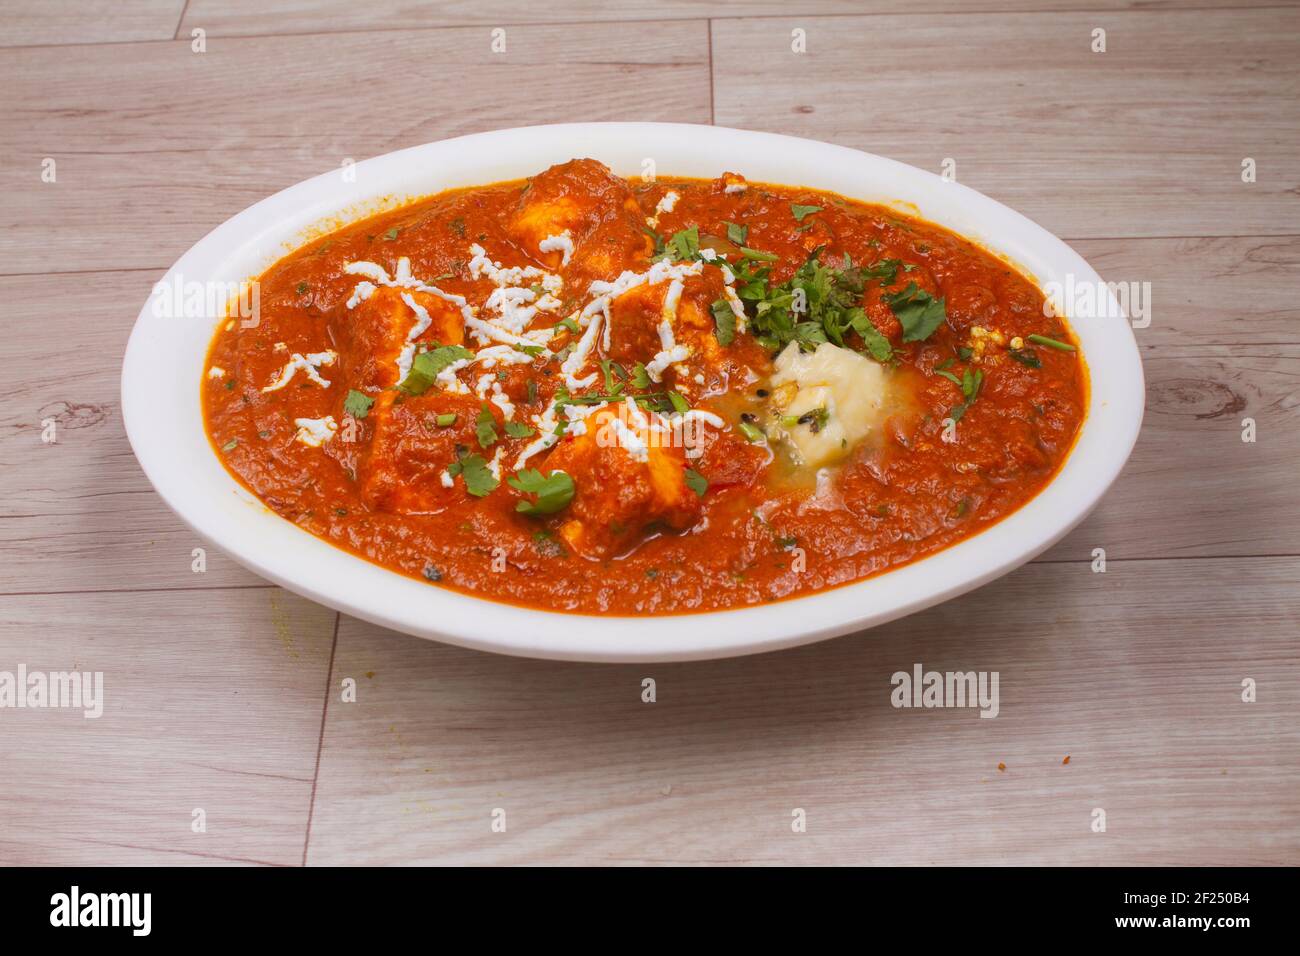 indian dish Paneer masala or paneer lachhedar served in bowl on wooden background Stock Photo